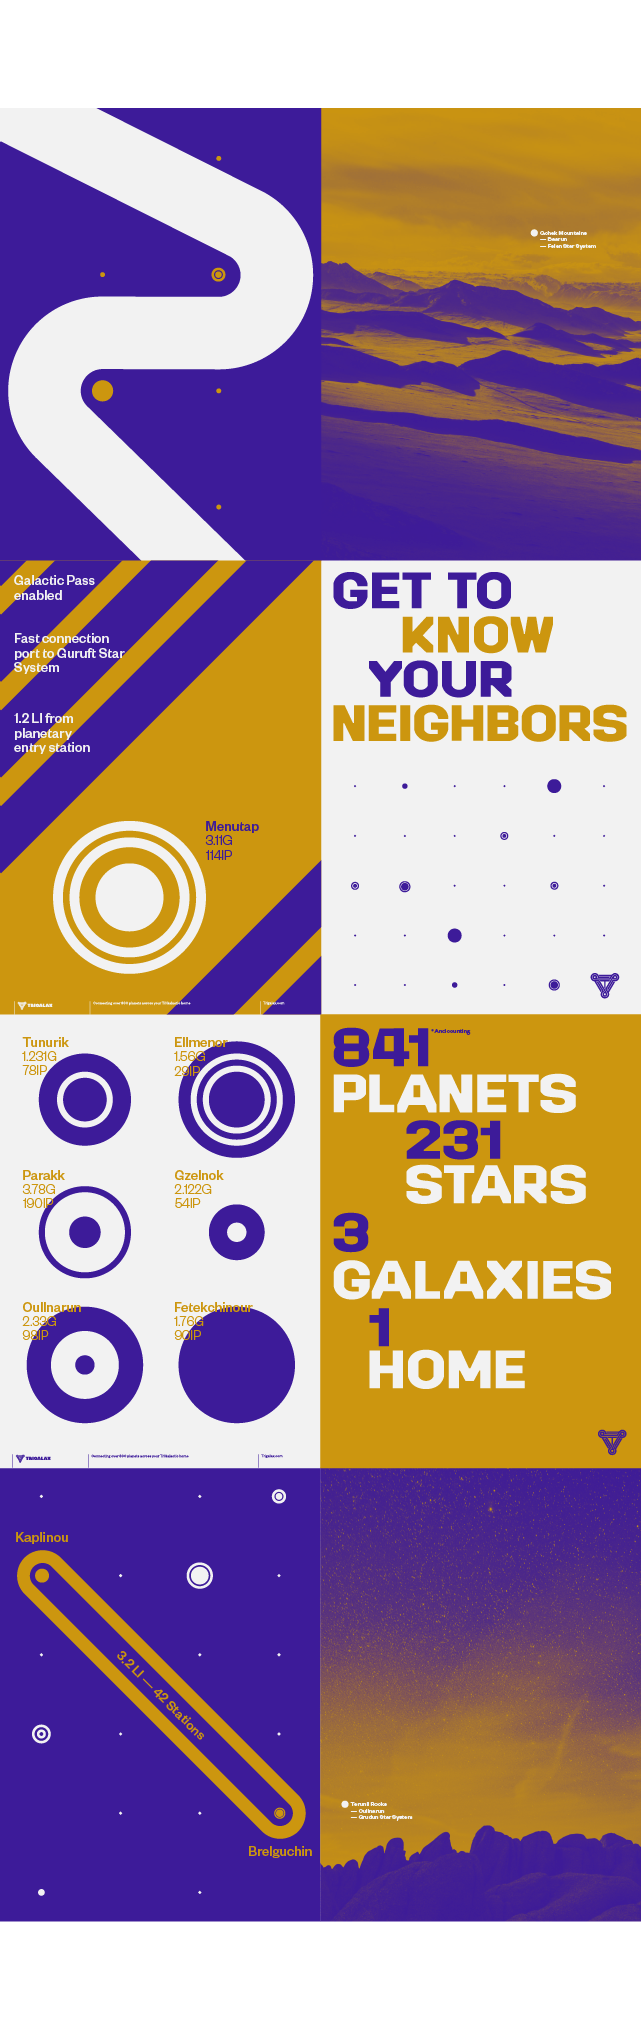 17_Trigalax-Space-Branding-Campaign-Posters-System-M-1